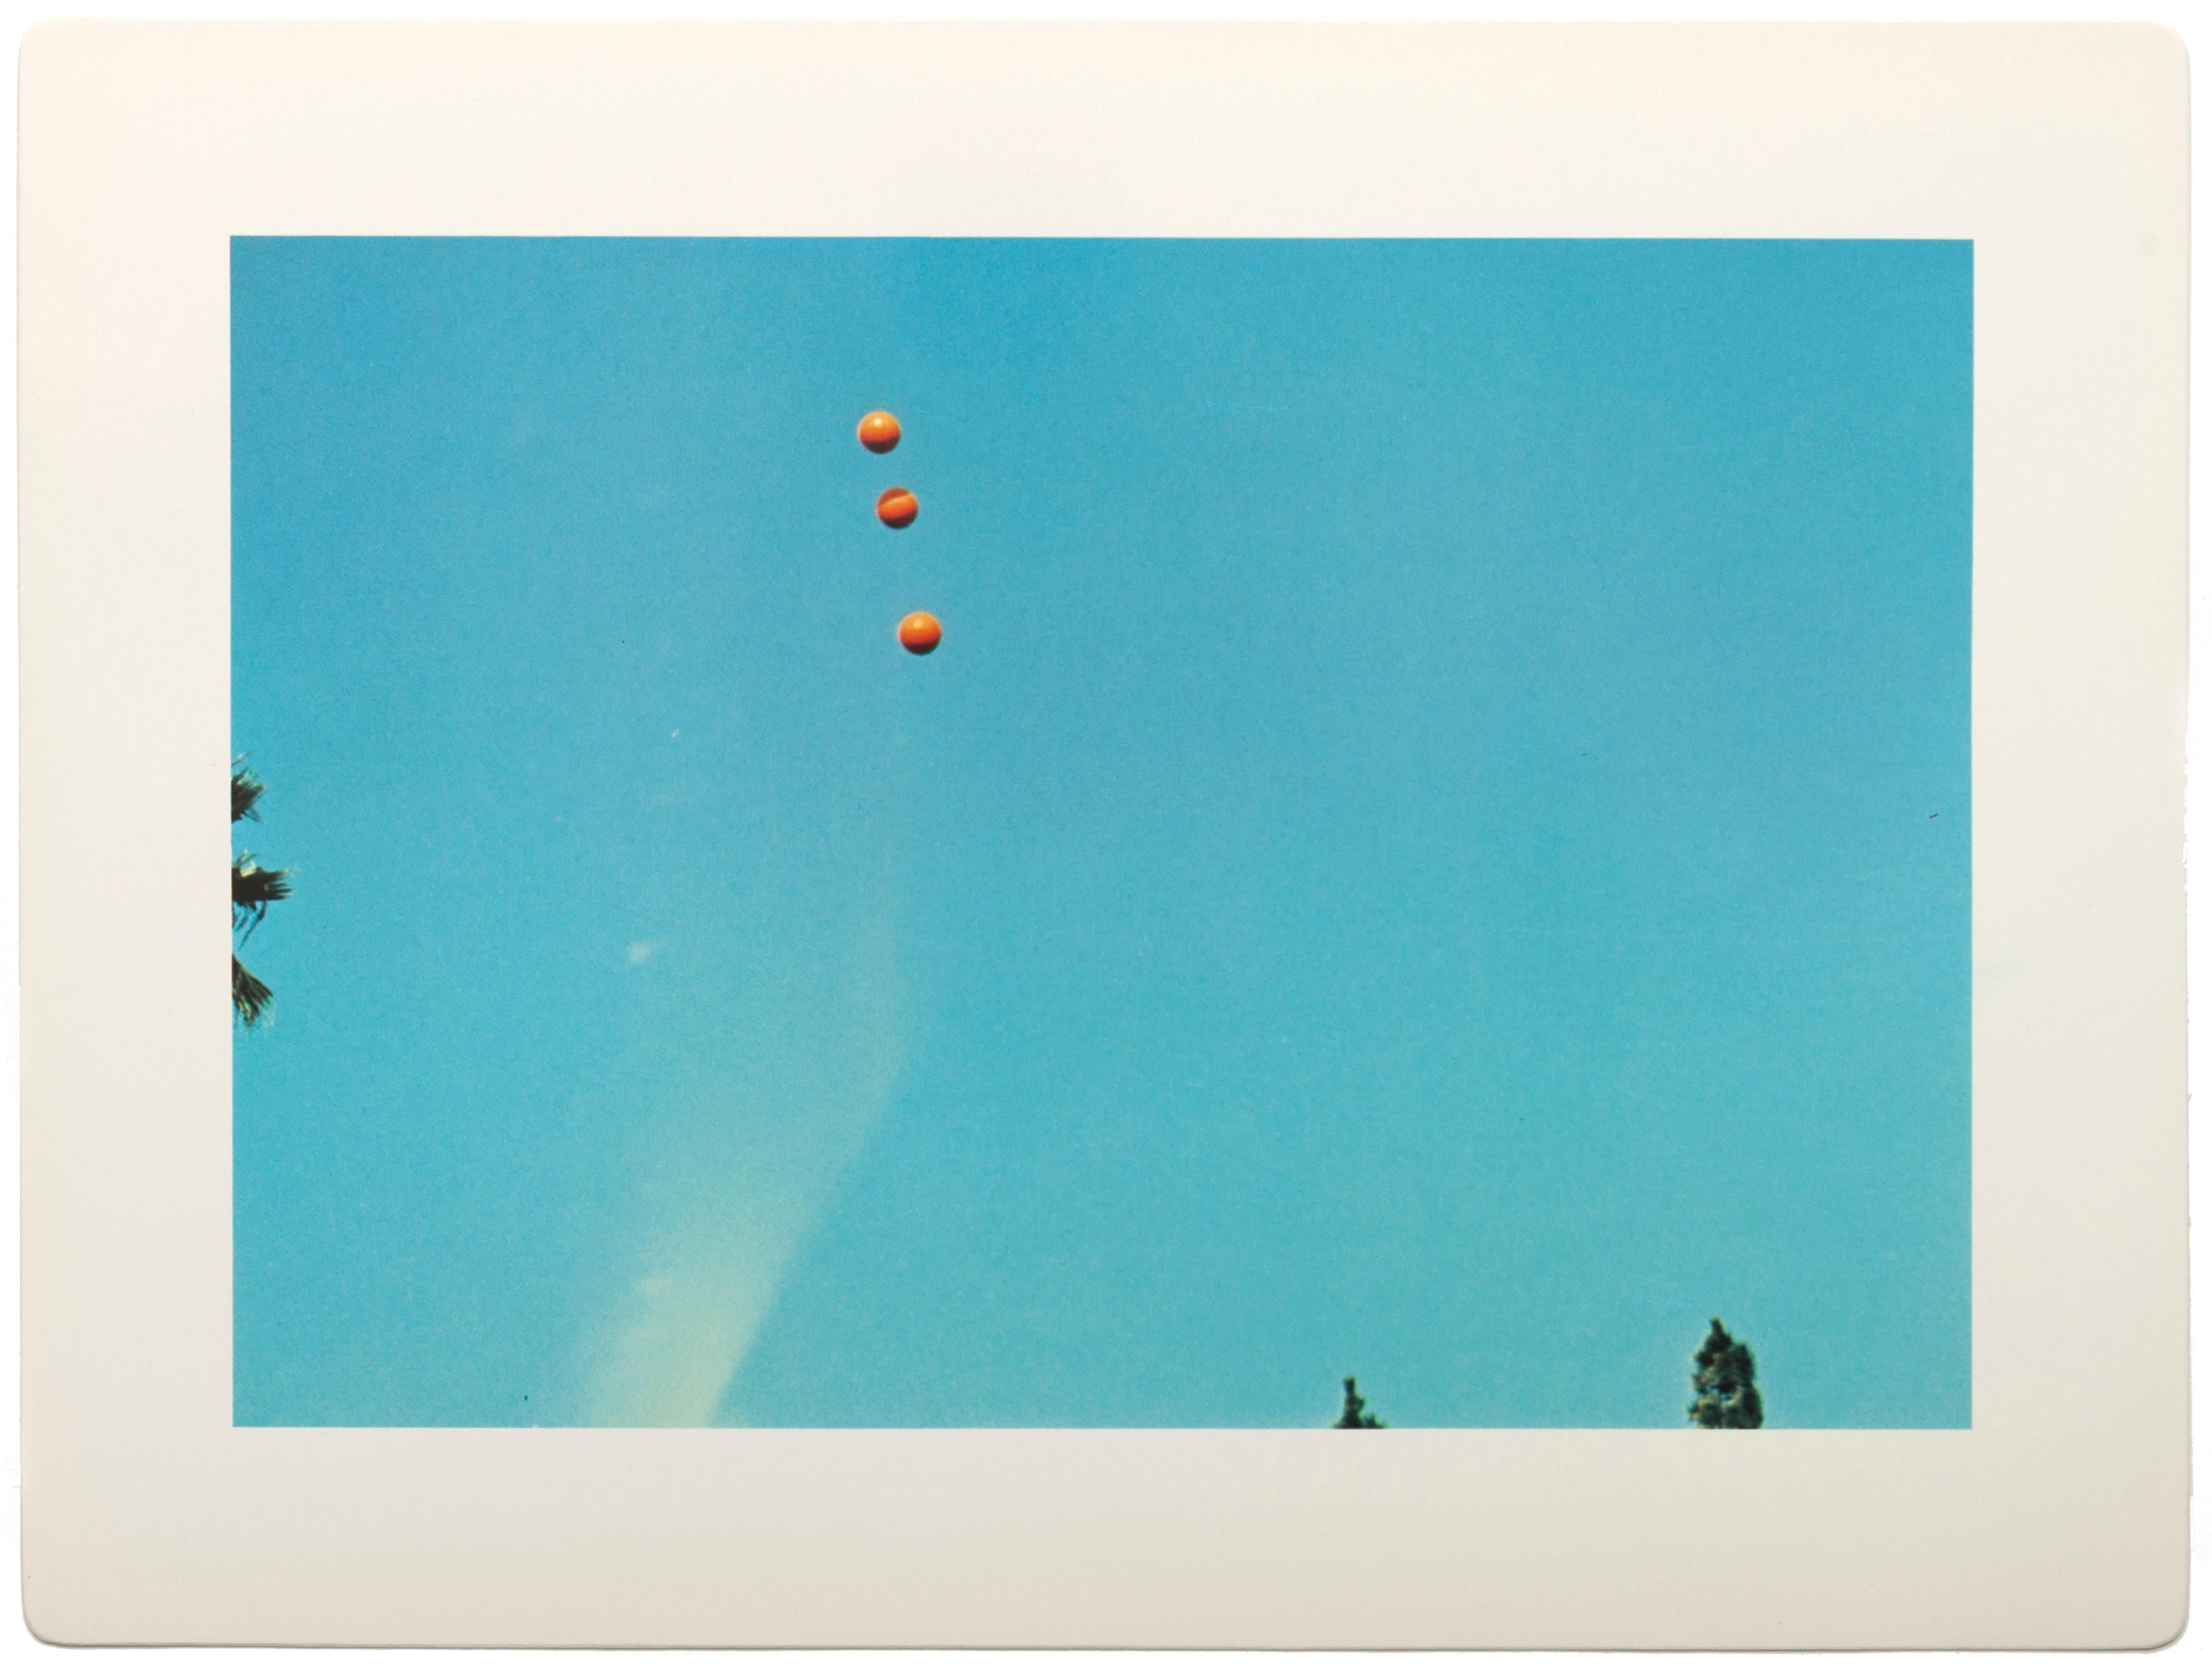 JOHN BALDESSARI
Throwing Three Balls in the Air to Get a Straight Line (Best of Thirty-Six Attempts), 1973

Complete set of twelve offset lithographs in colours
On coated stock paper, with title and justification pages
Signed by the publishers and